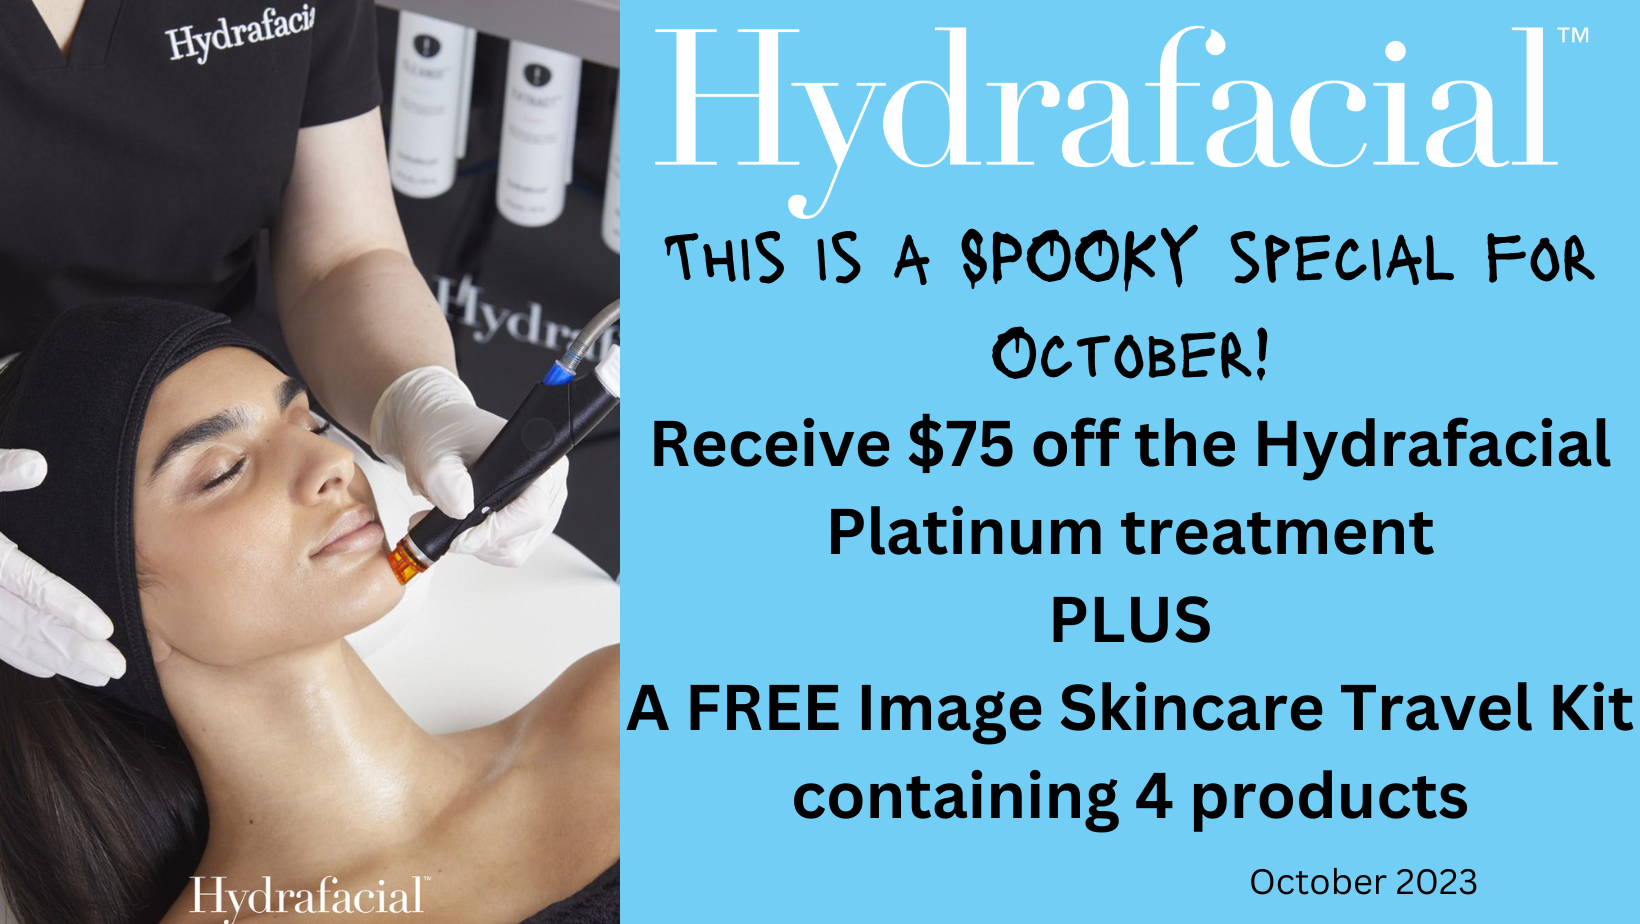 This is a SPOOKY special for October! Receive $75 off the Hydrafacial Platinum treatment